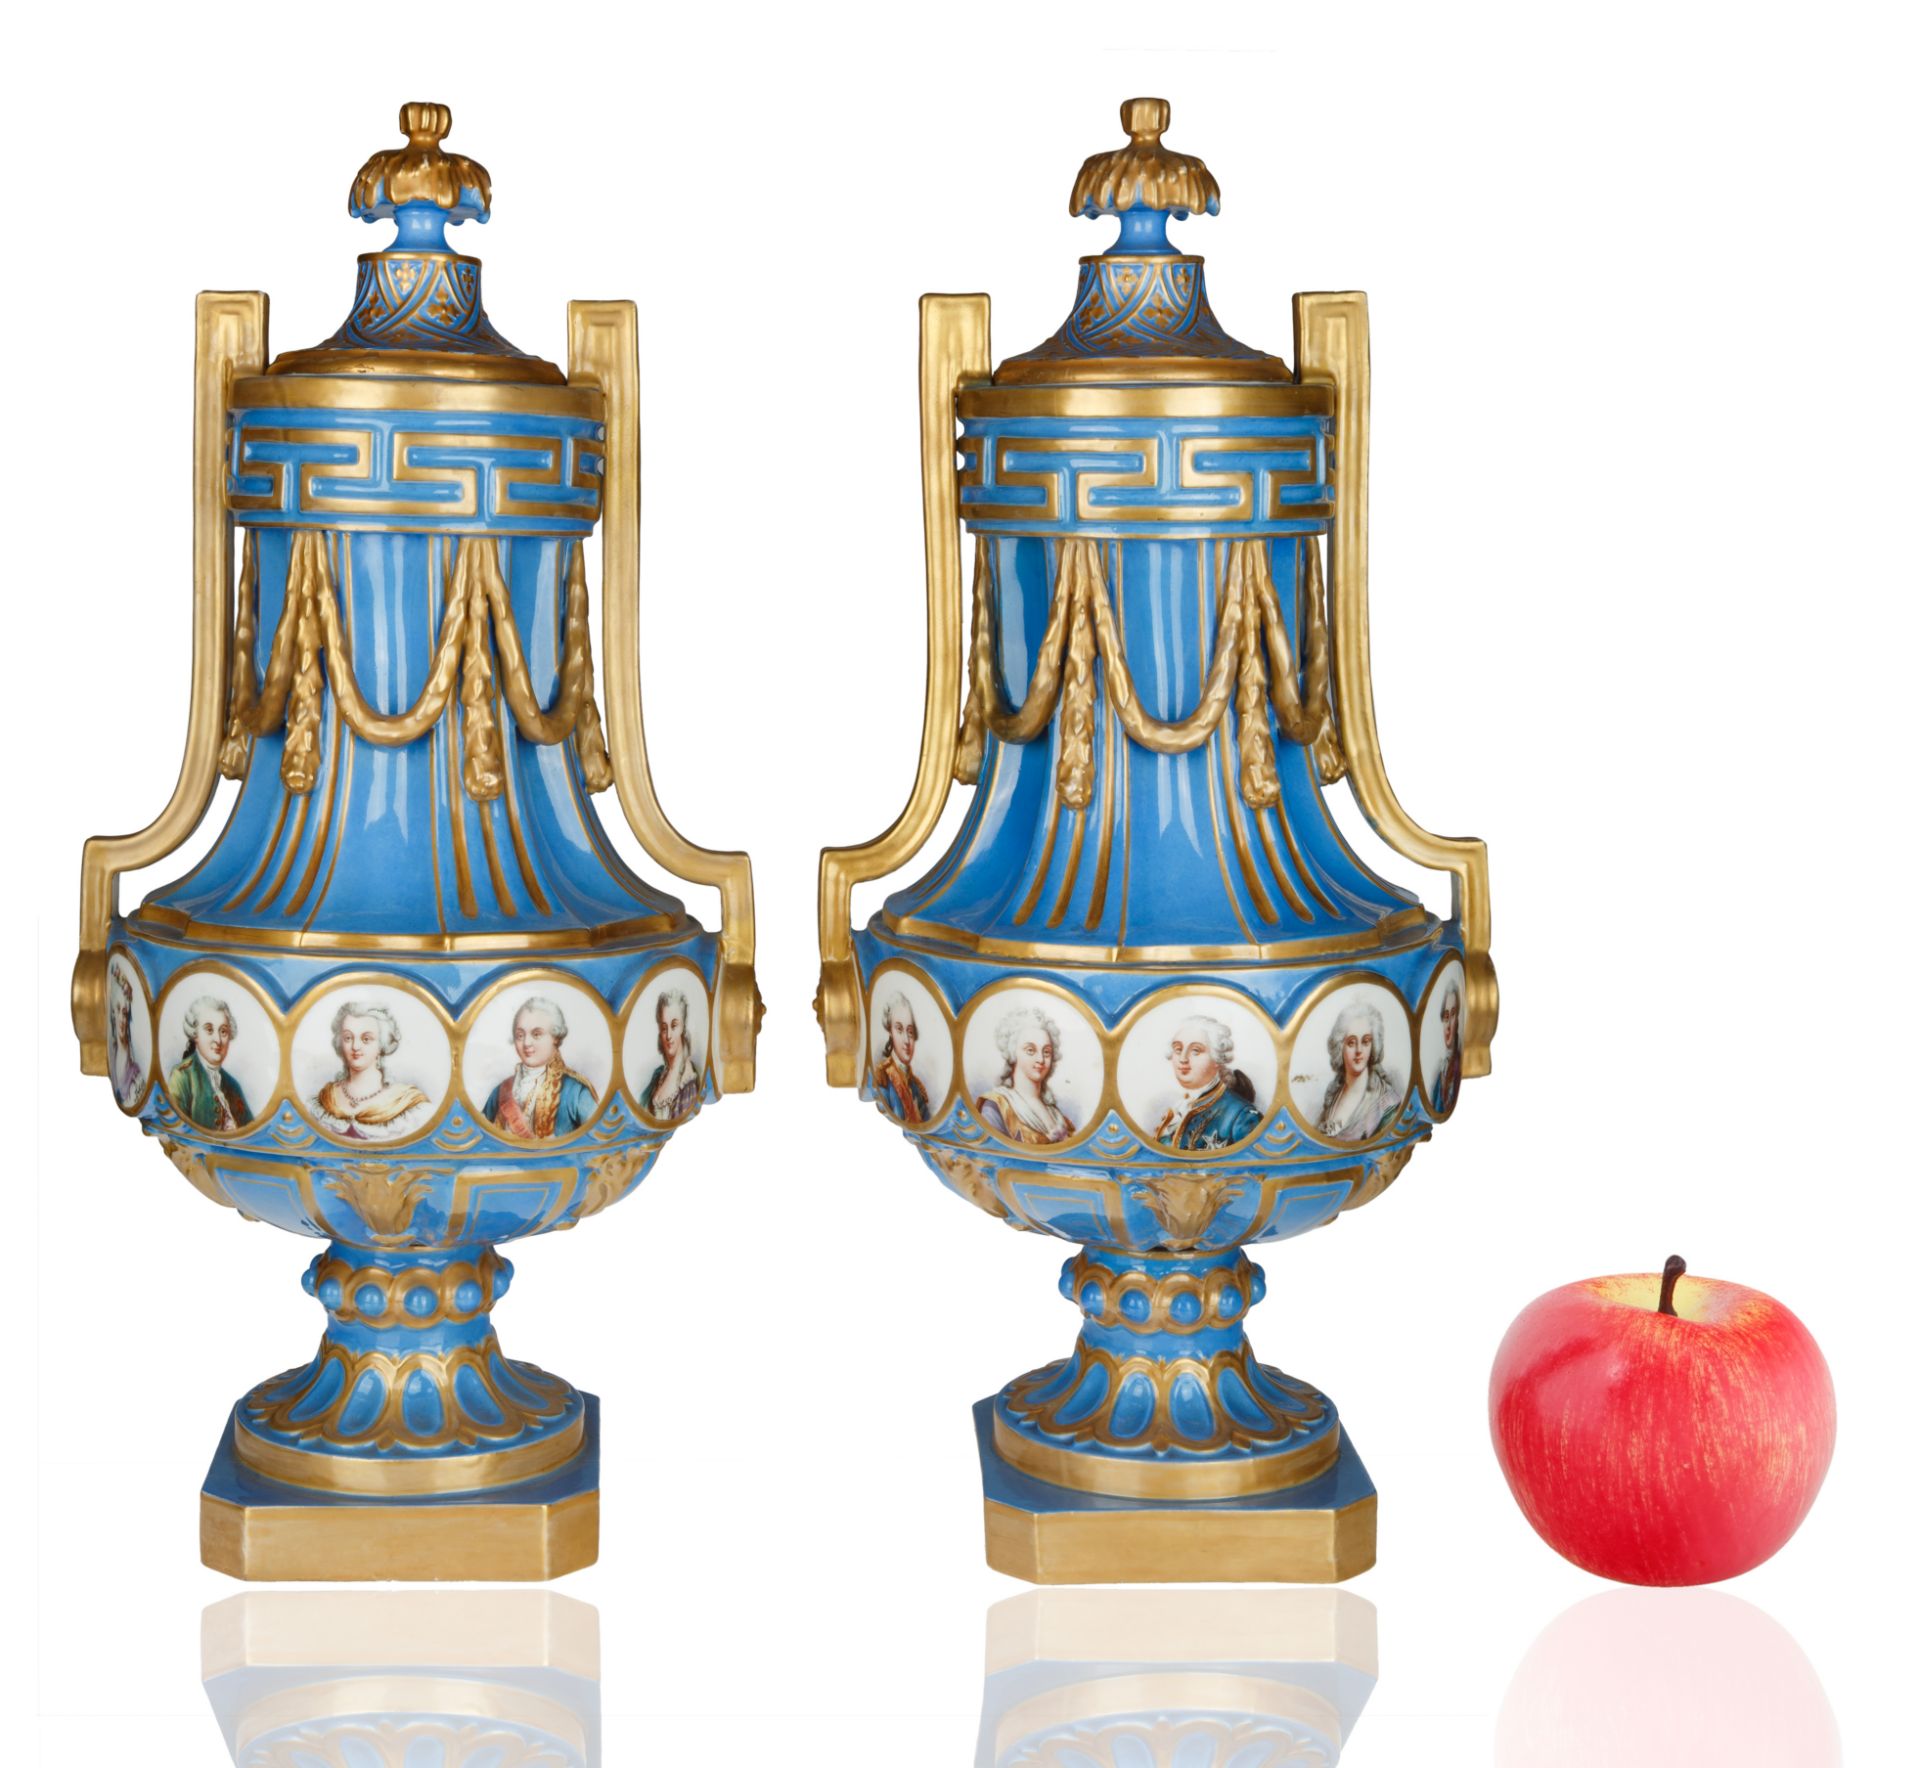 PAIR OF PORCELAIN 'NEAPOLITAN' SEVRES-STYLE VASES - Image 5 of 5